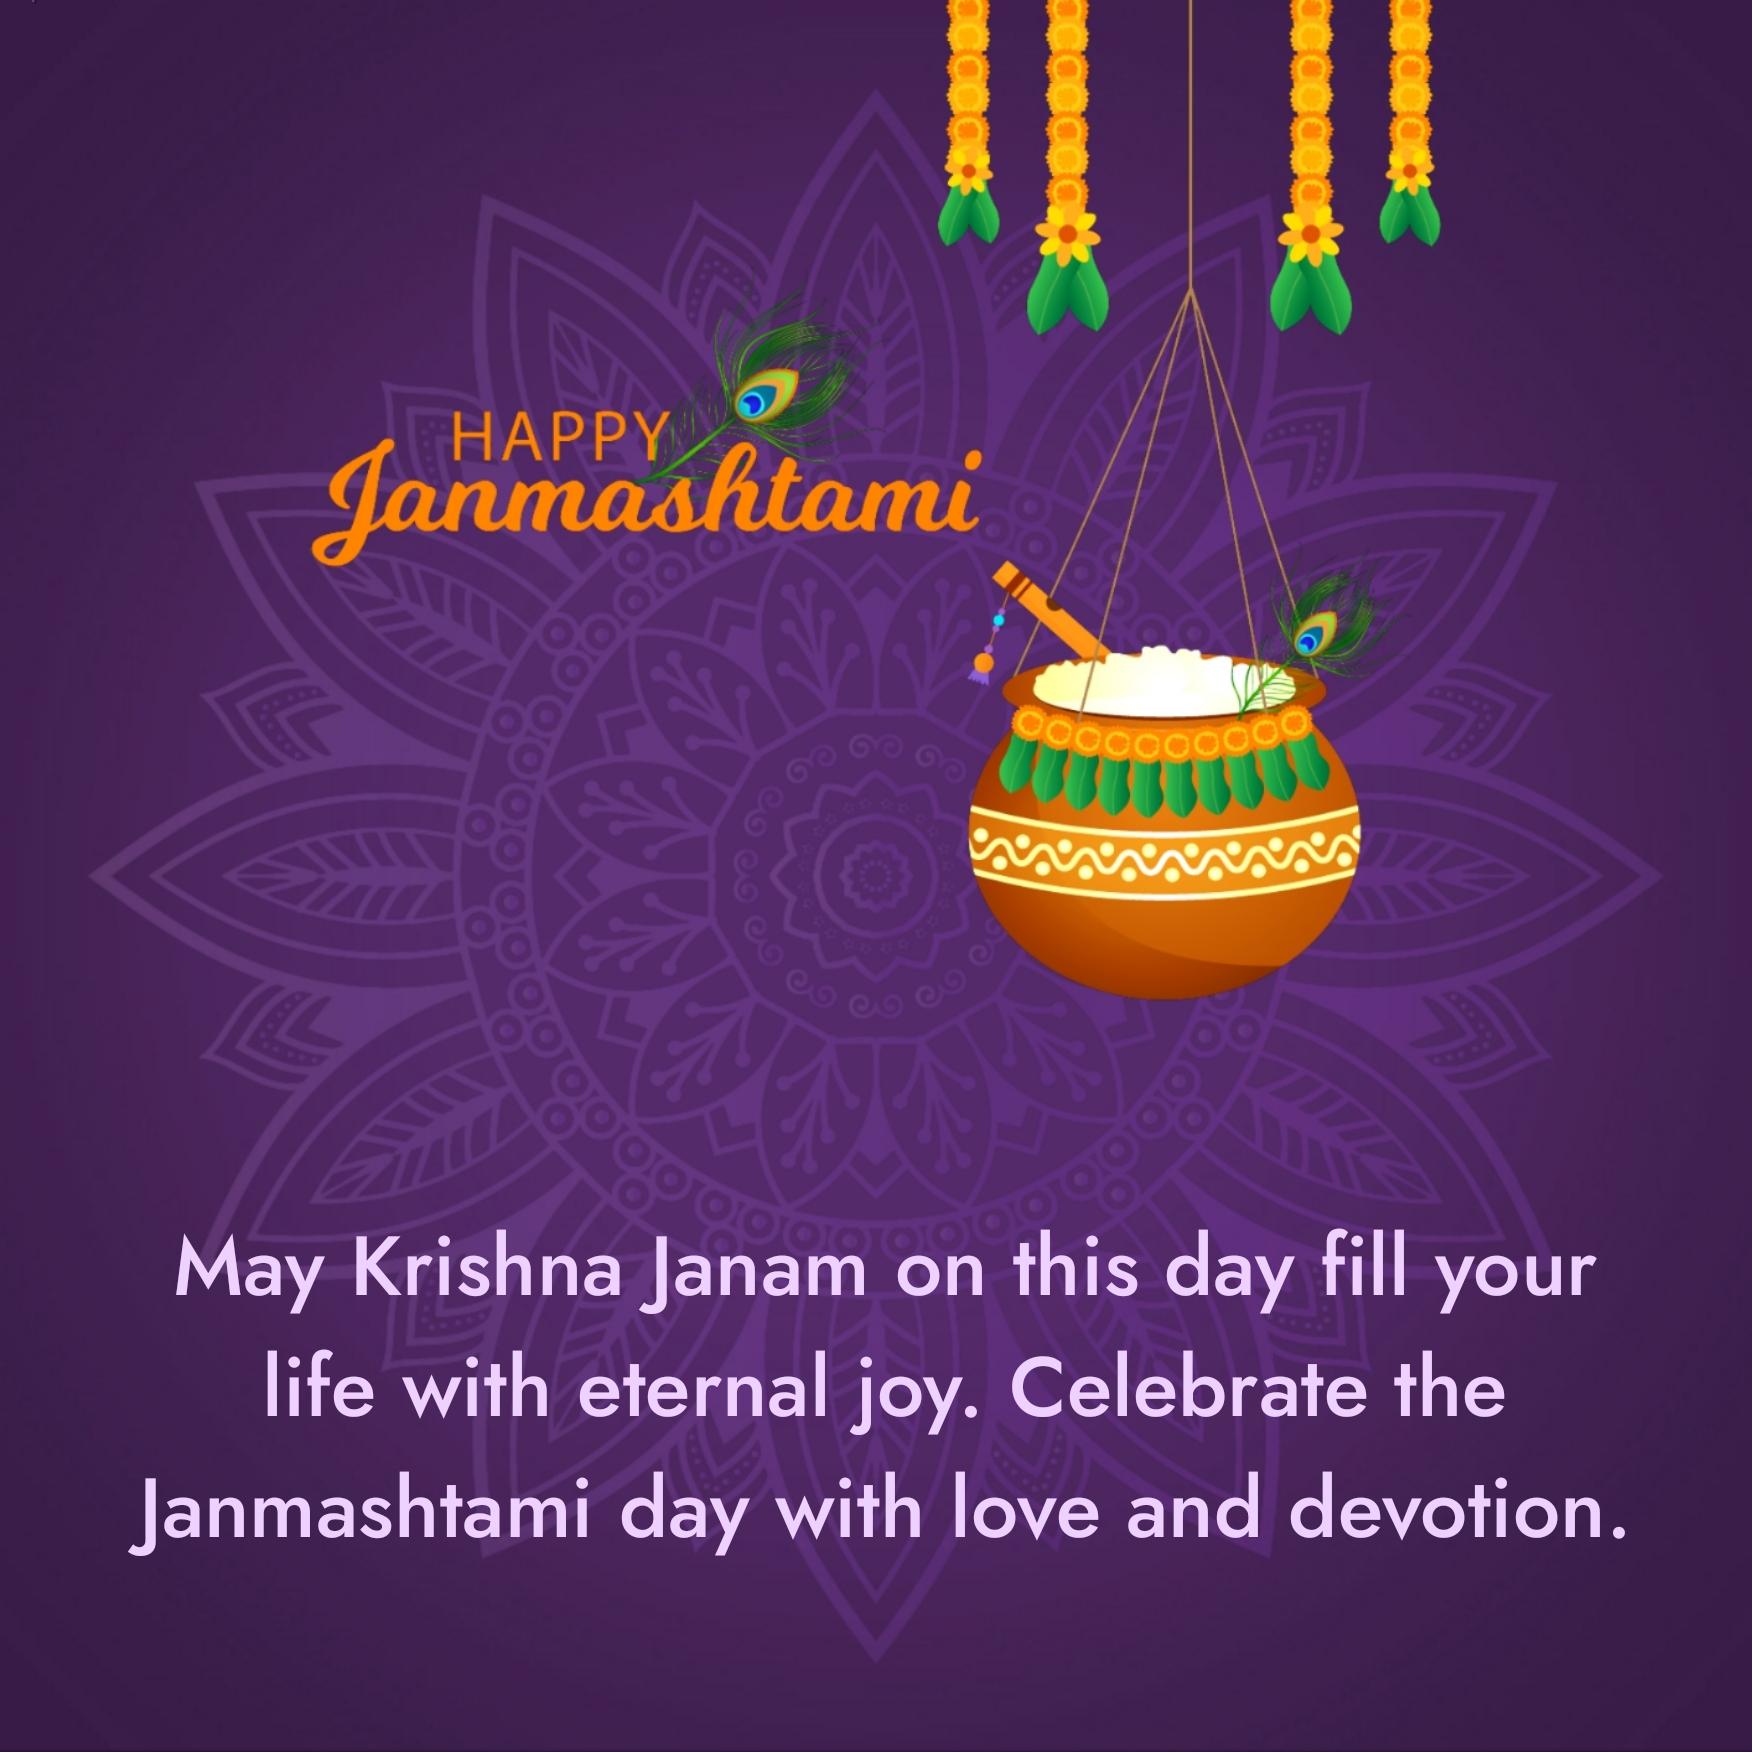 May Krishna Janam on this day fill your life with eternal joy